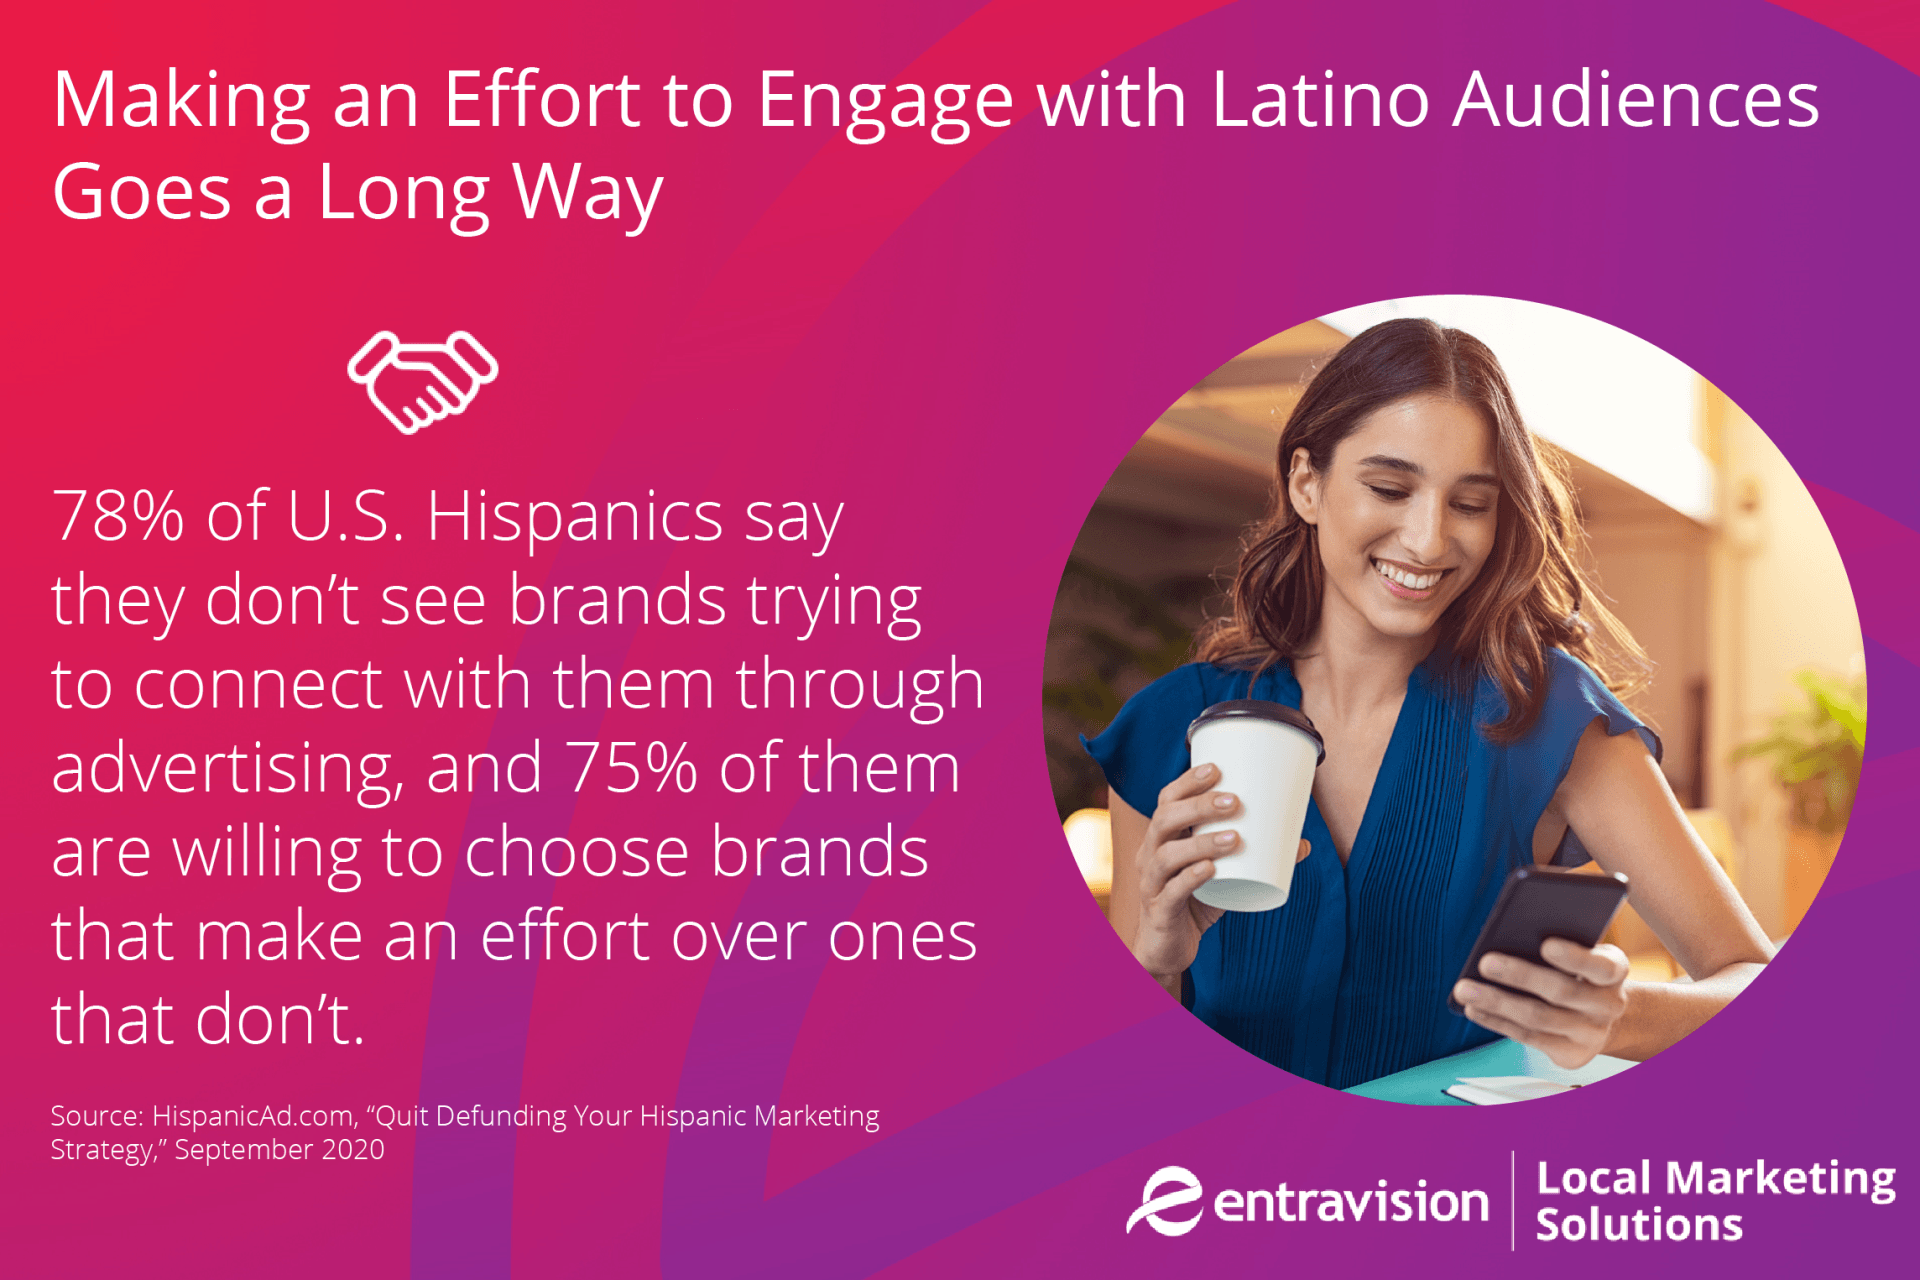 A pink and purple background with a picture of a woman looking at her phone details why it's important to make an effort to engage with Latino audiences.